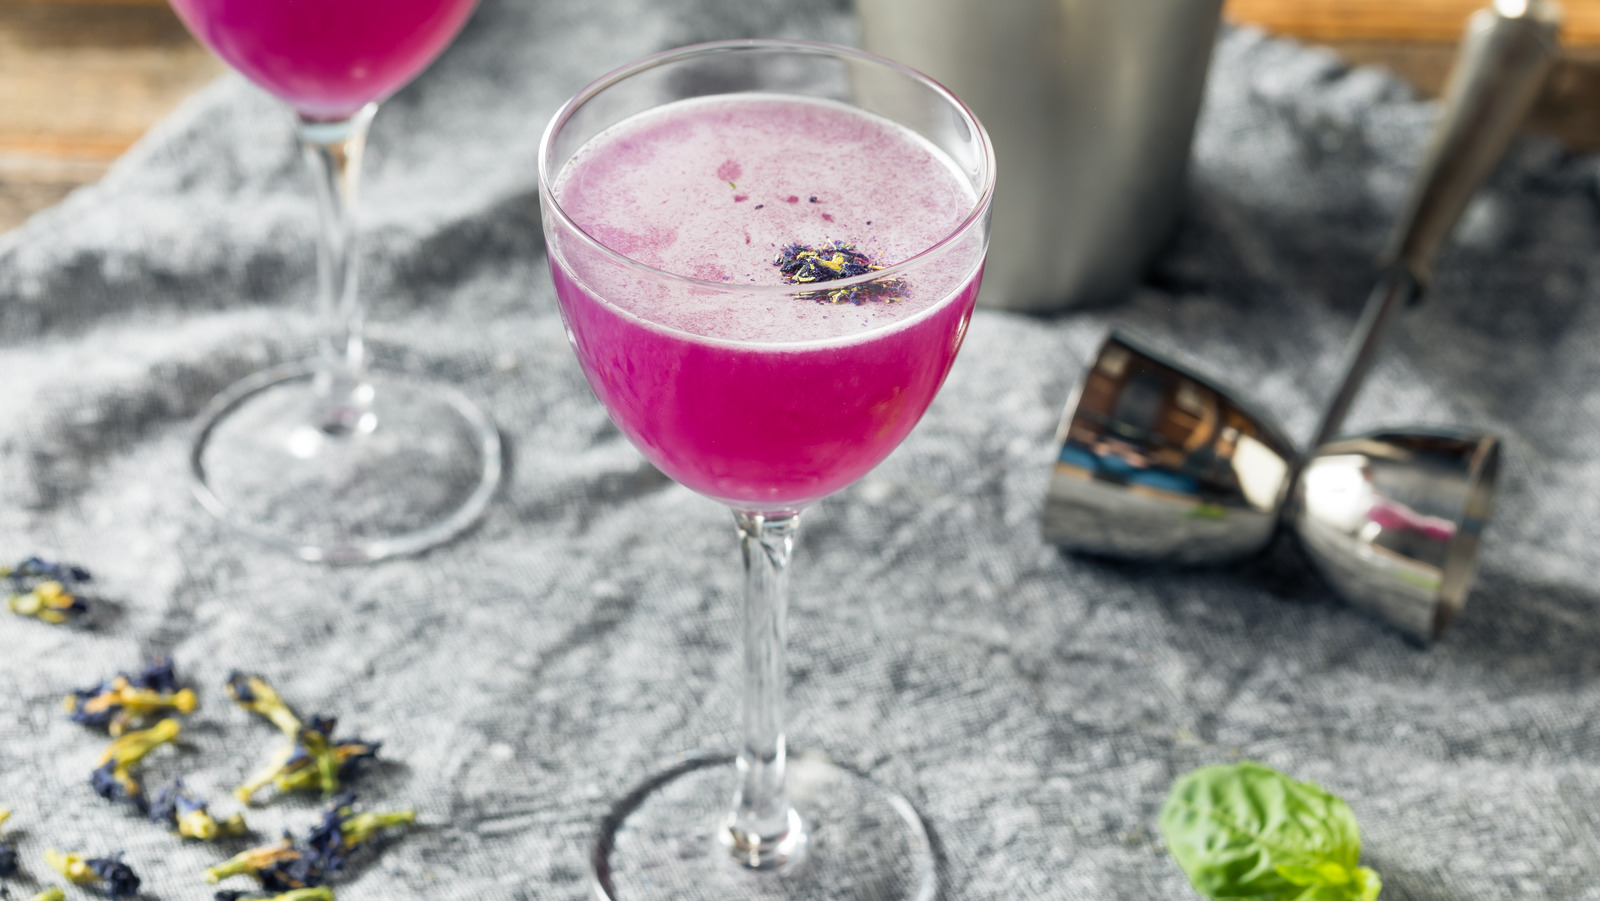 Aldi Just Added A Color-Changing Gin, But Only In One Country